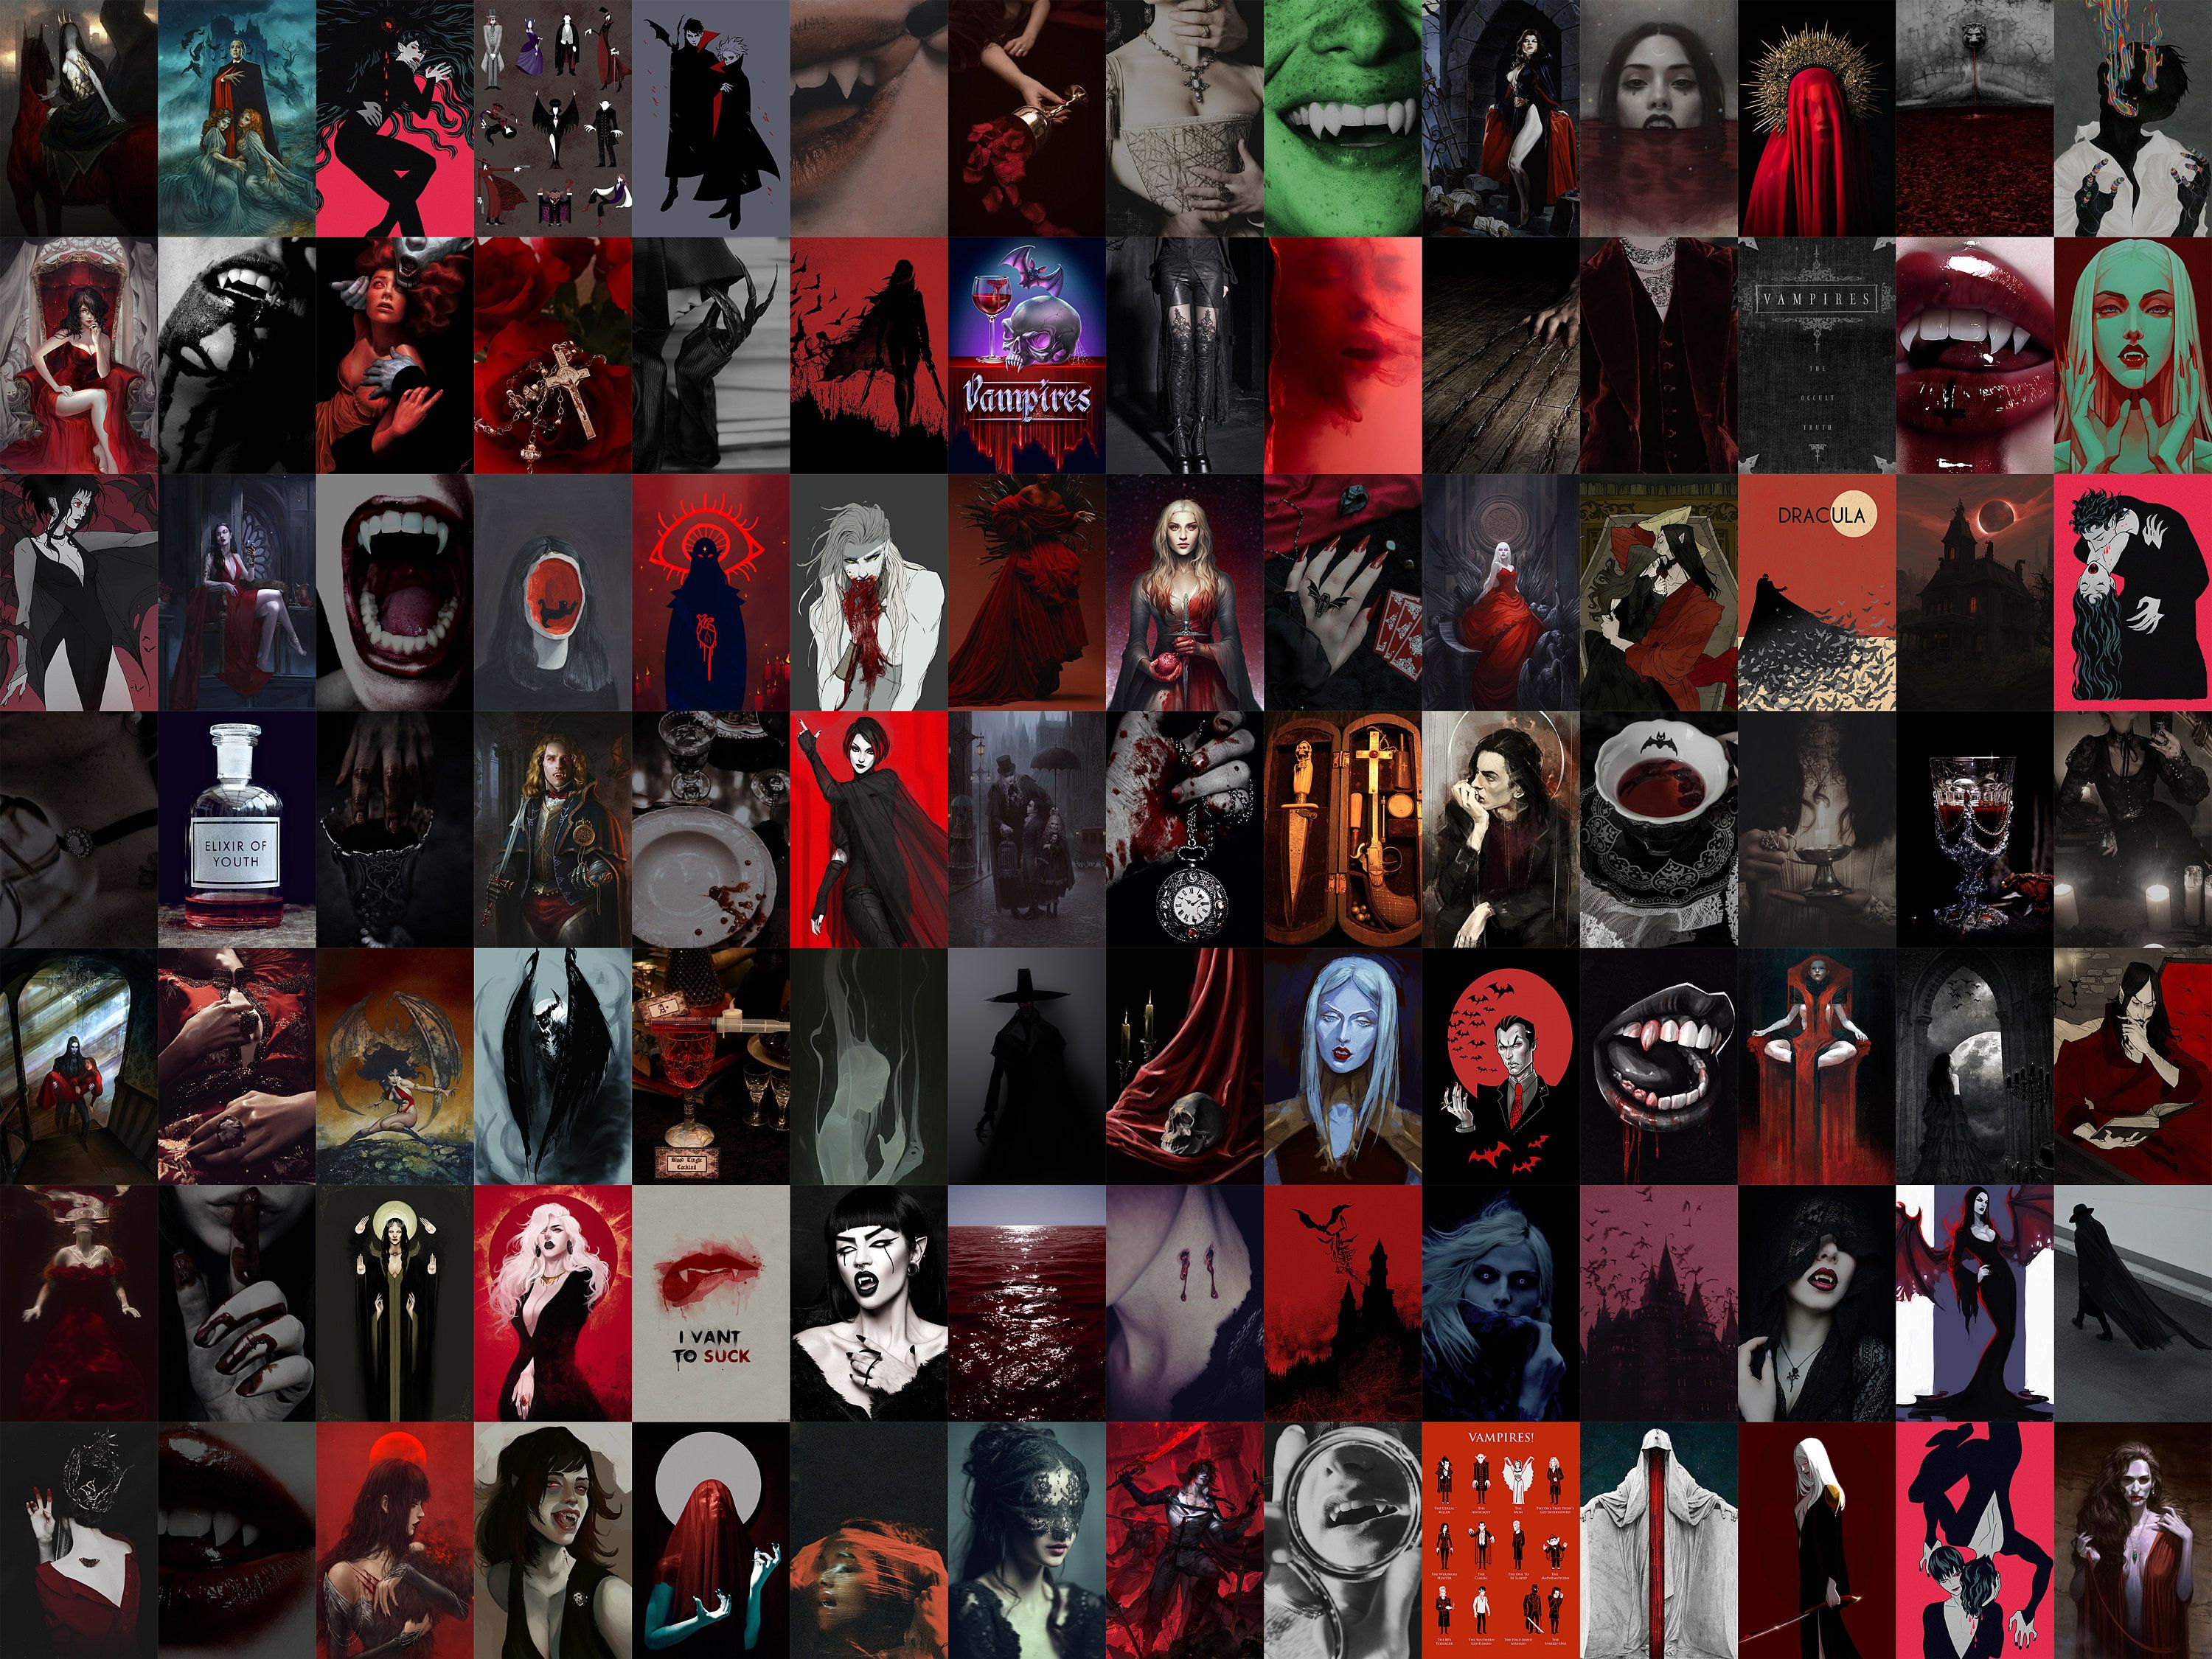 A collage of many different images that are all black and red - Vampire